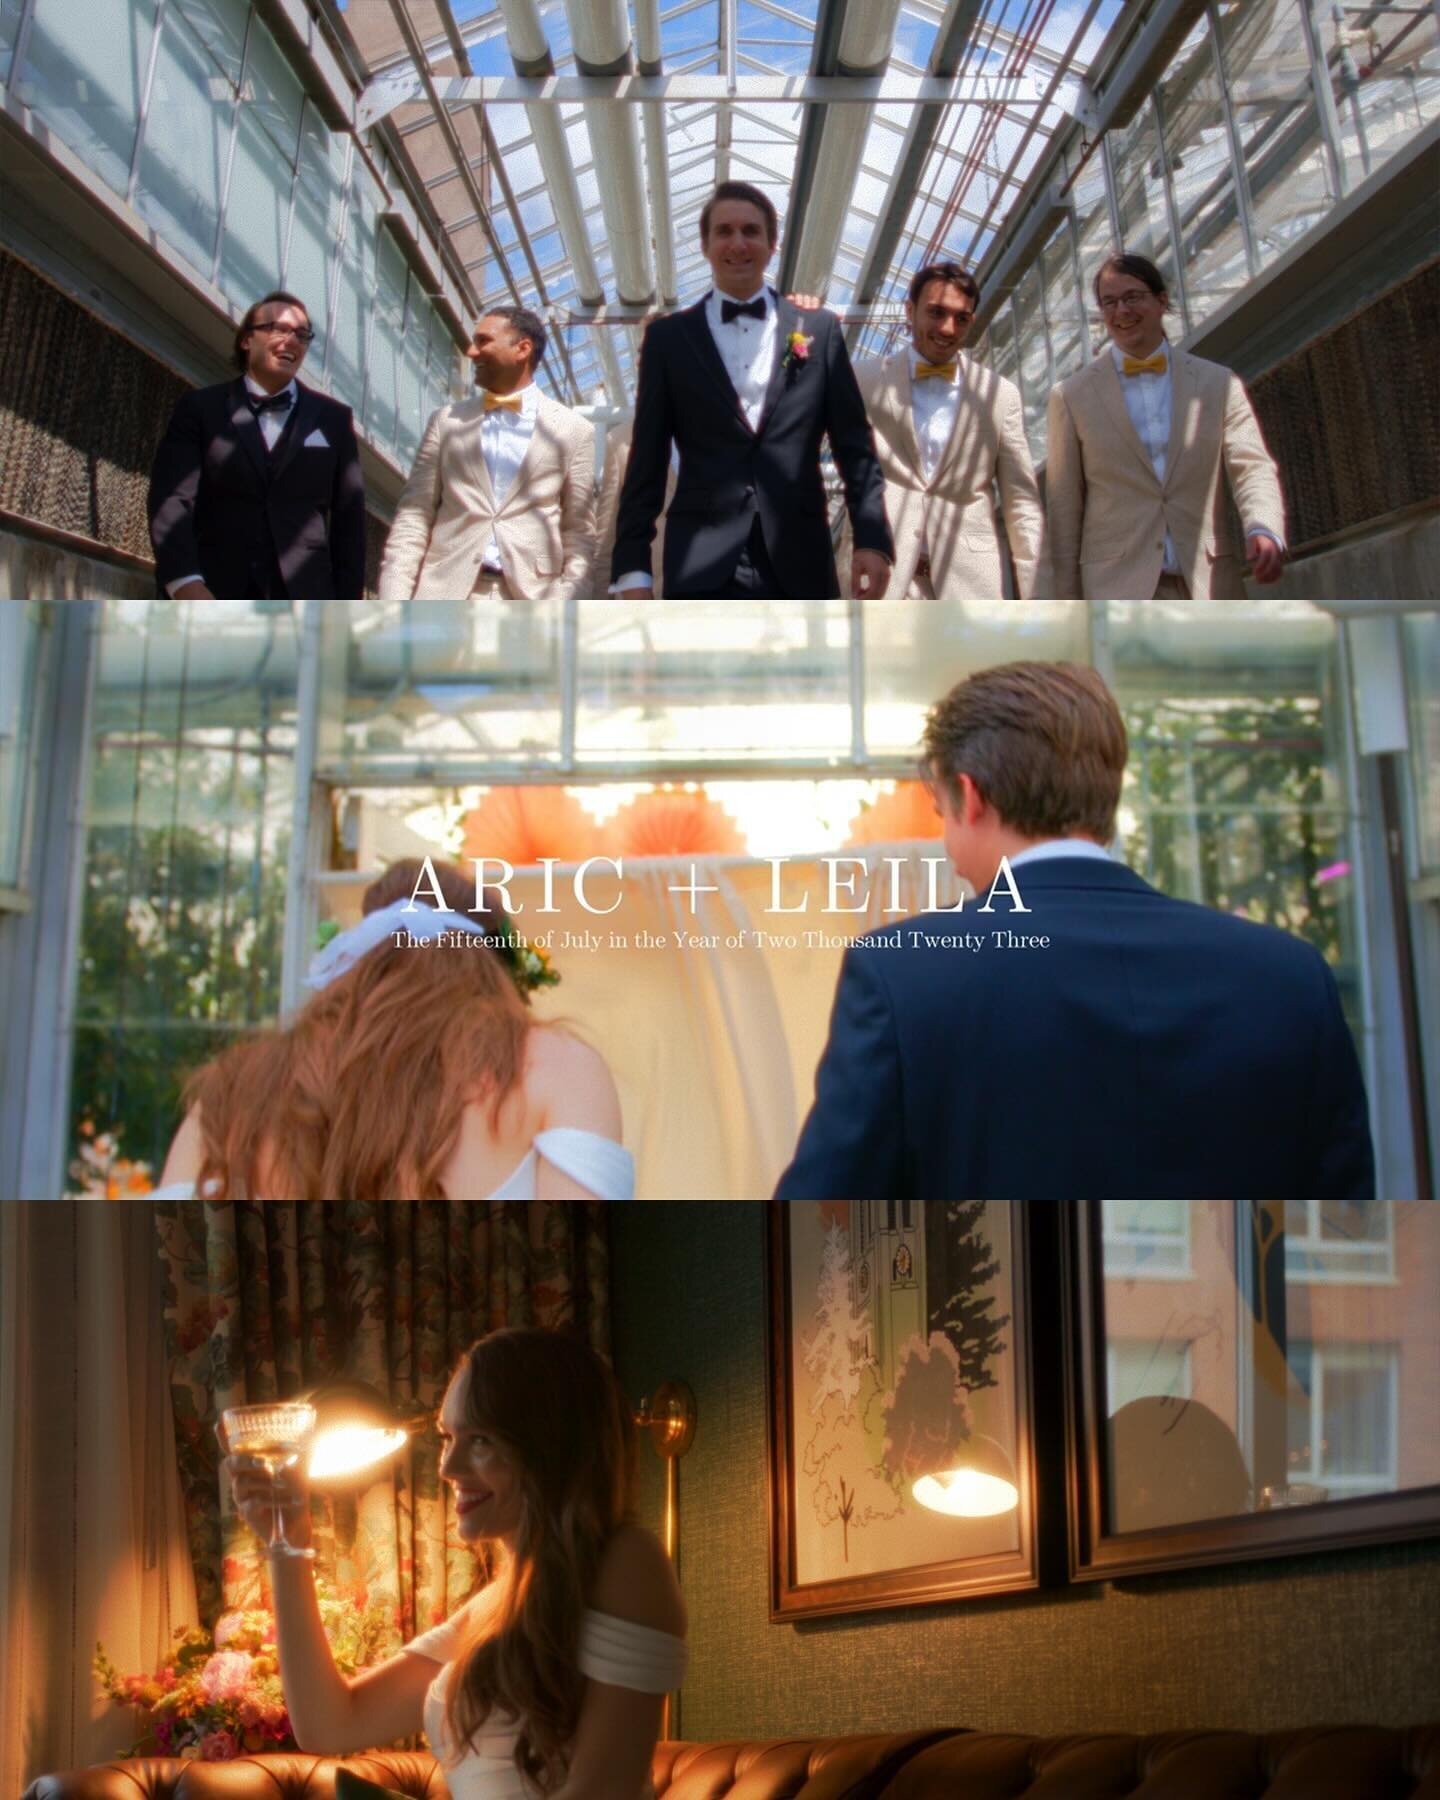 Happy Friday everyone! Here are some of our favorite stills from A+L&rsquo;s recent wedding! 

#wedding #love #weddingvideo #weddingfilm #michigan #michiganwedding #michiganweddingphotography #michiganweddingfilmmaker #weddingvideography #weddingfilm